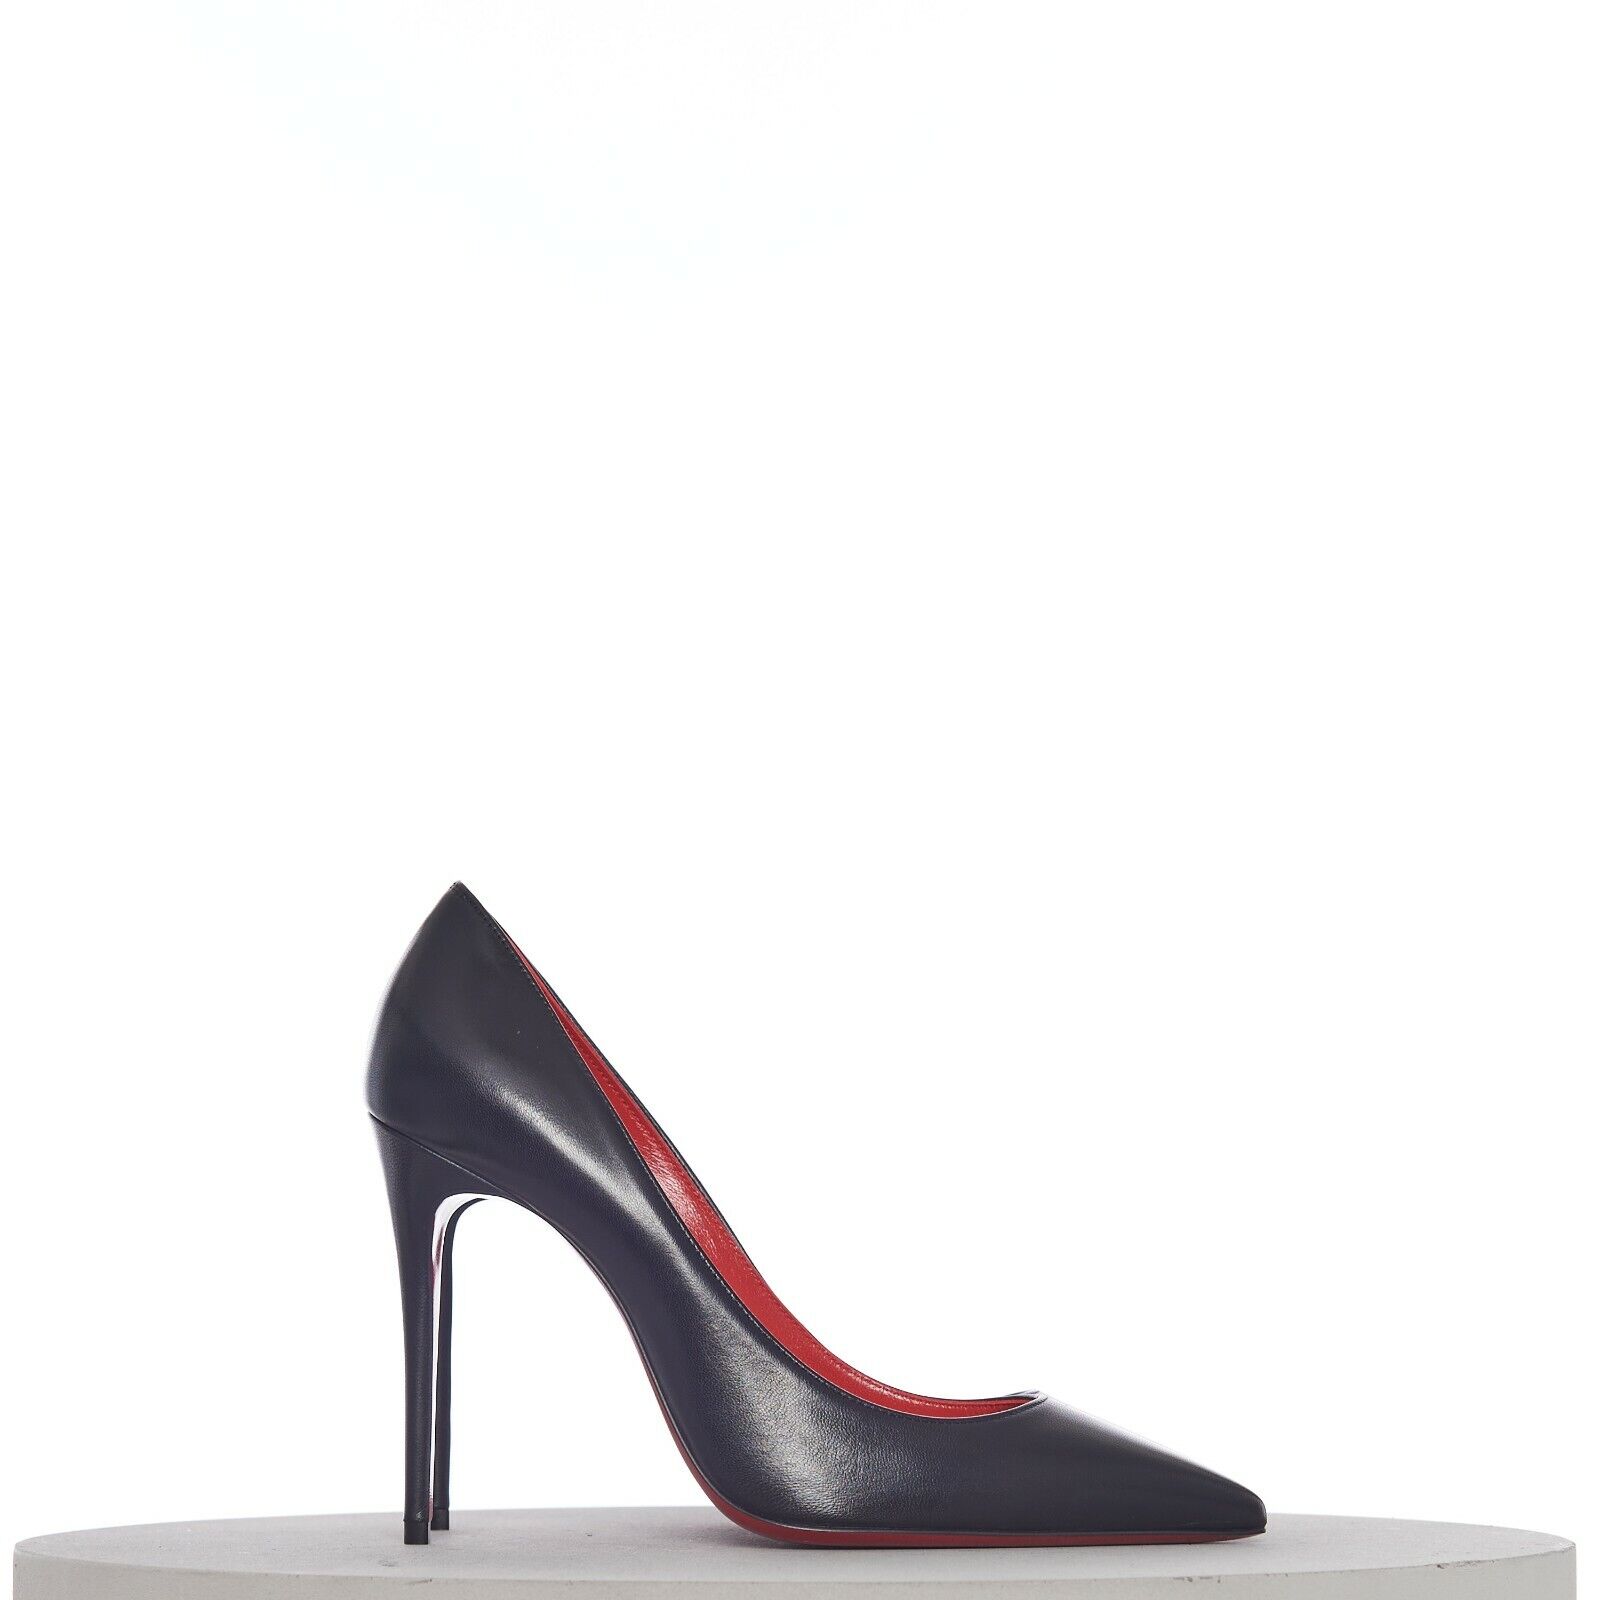 CHRISTIAN LOUBOUTIN 775$ Kate 100 Pumps Black Nappa Leather / Red Leather Lining